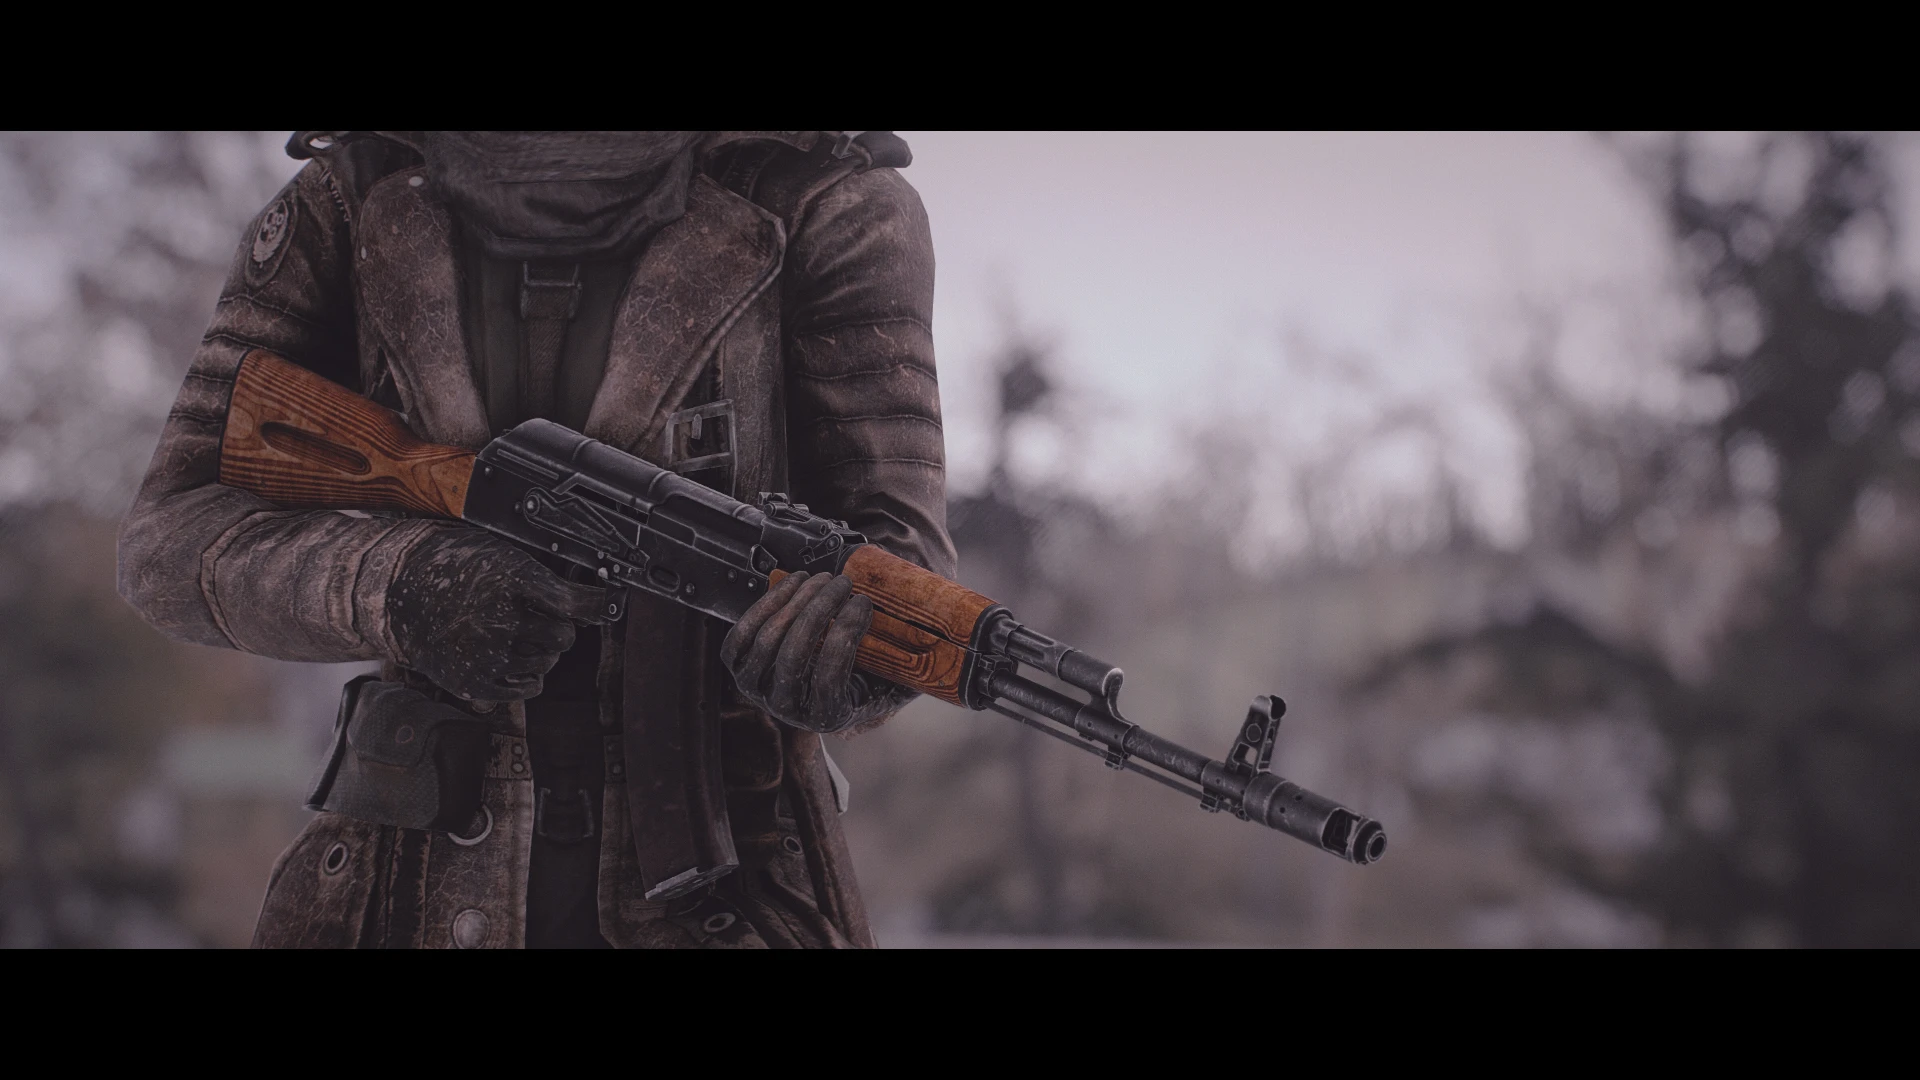 Cfl enb cinematic film looks fallout 4